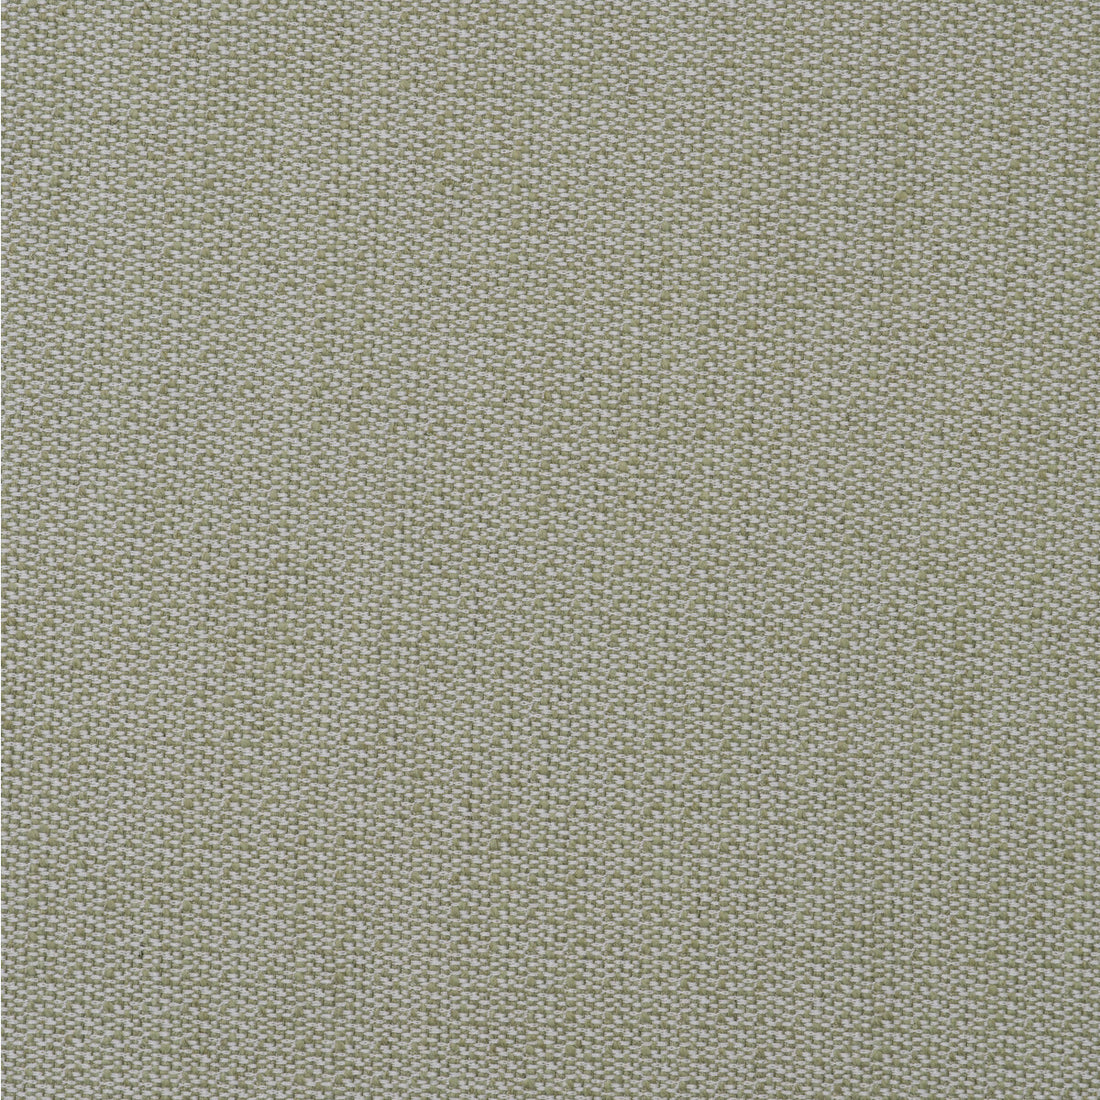 Ravello fabric in leaf color - pattern AM100431.3.0 - by Kravet Couture in the Andrew Martin Amalfi collection